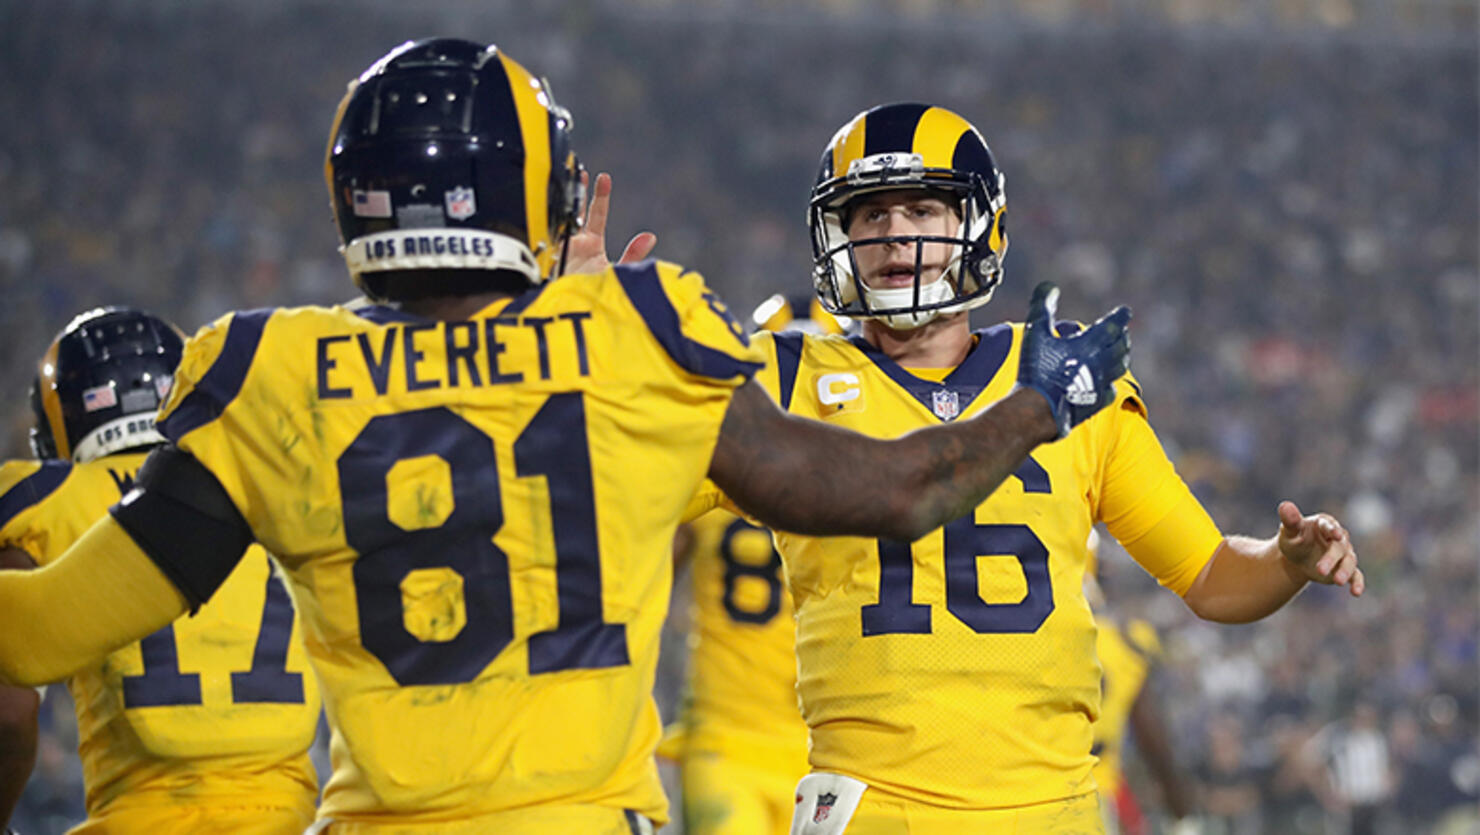 Quarterback Jared Goff #16 of the Los Angeles Rams celebrates a touchdown by teammate Gerald Everett #81 during the fourth quarter of the game against the Kansas City Chiefs at Los Angeles Memorial Coliseum